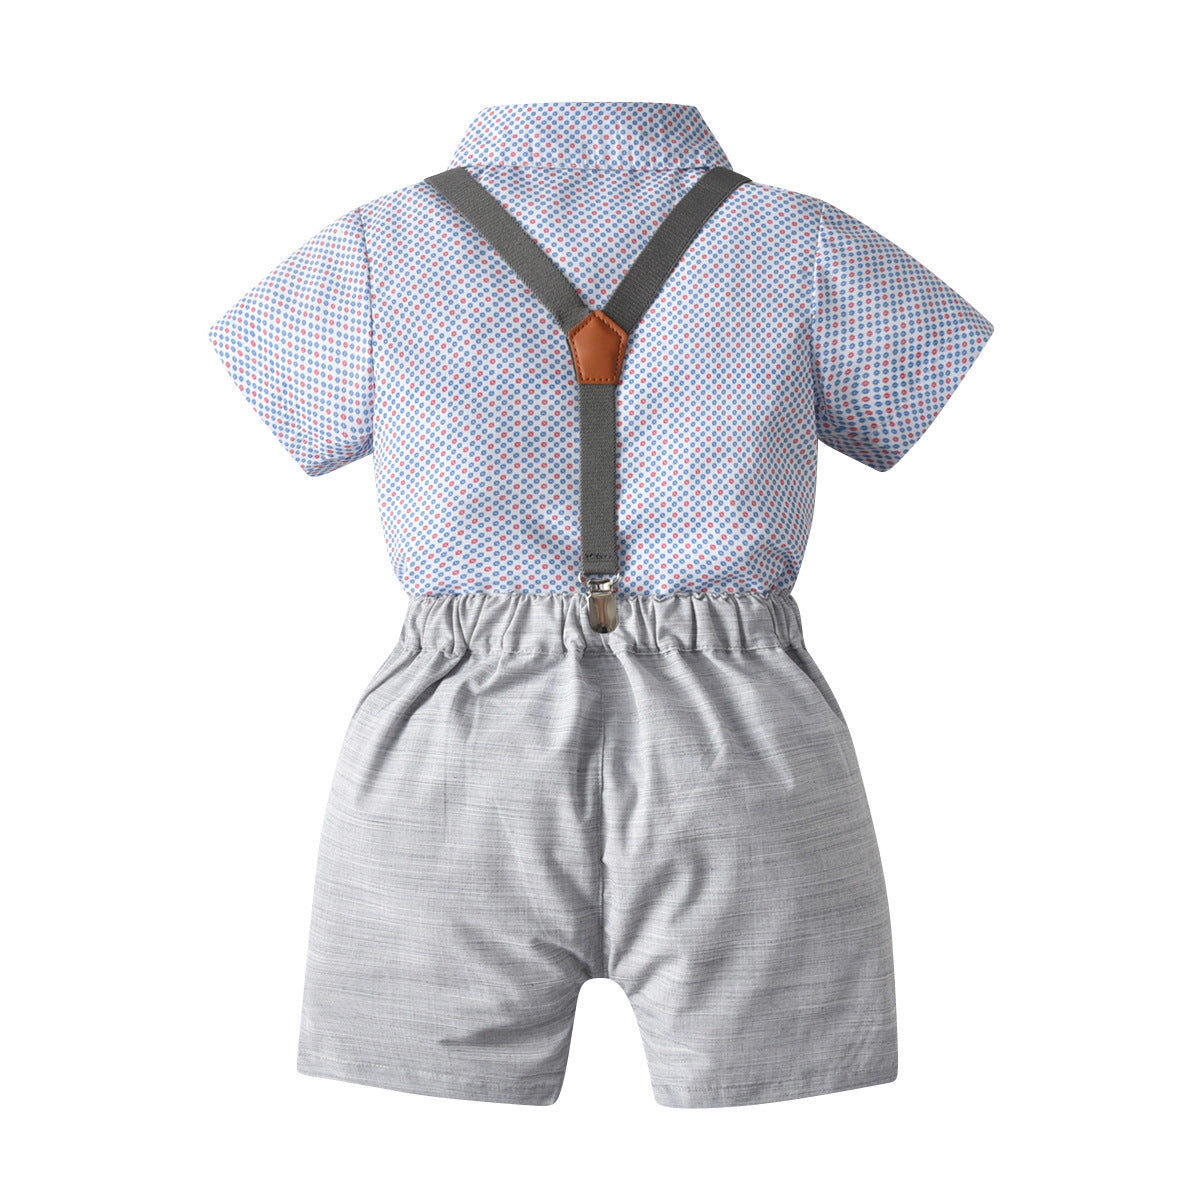 Boy's Polka Dot Bow Tie with Shirt & Suspenders Shorts